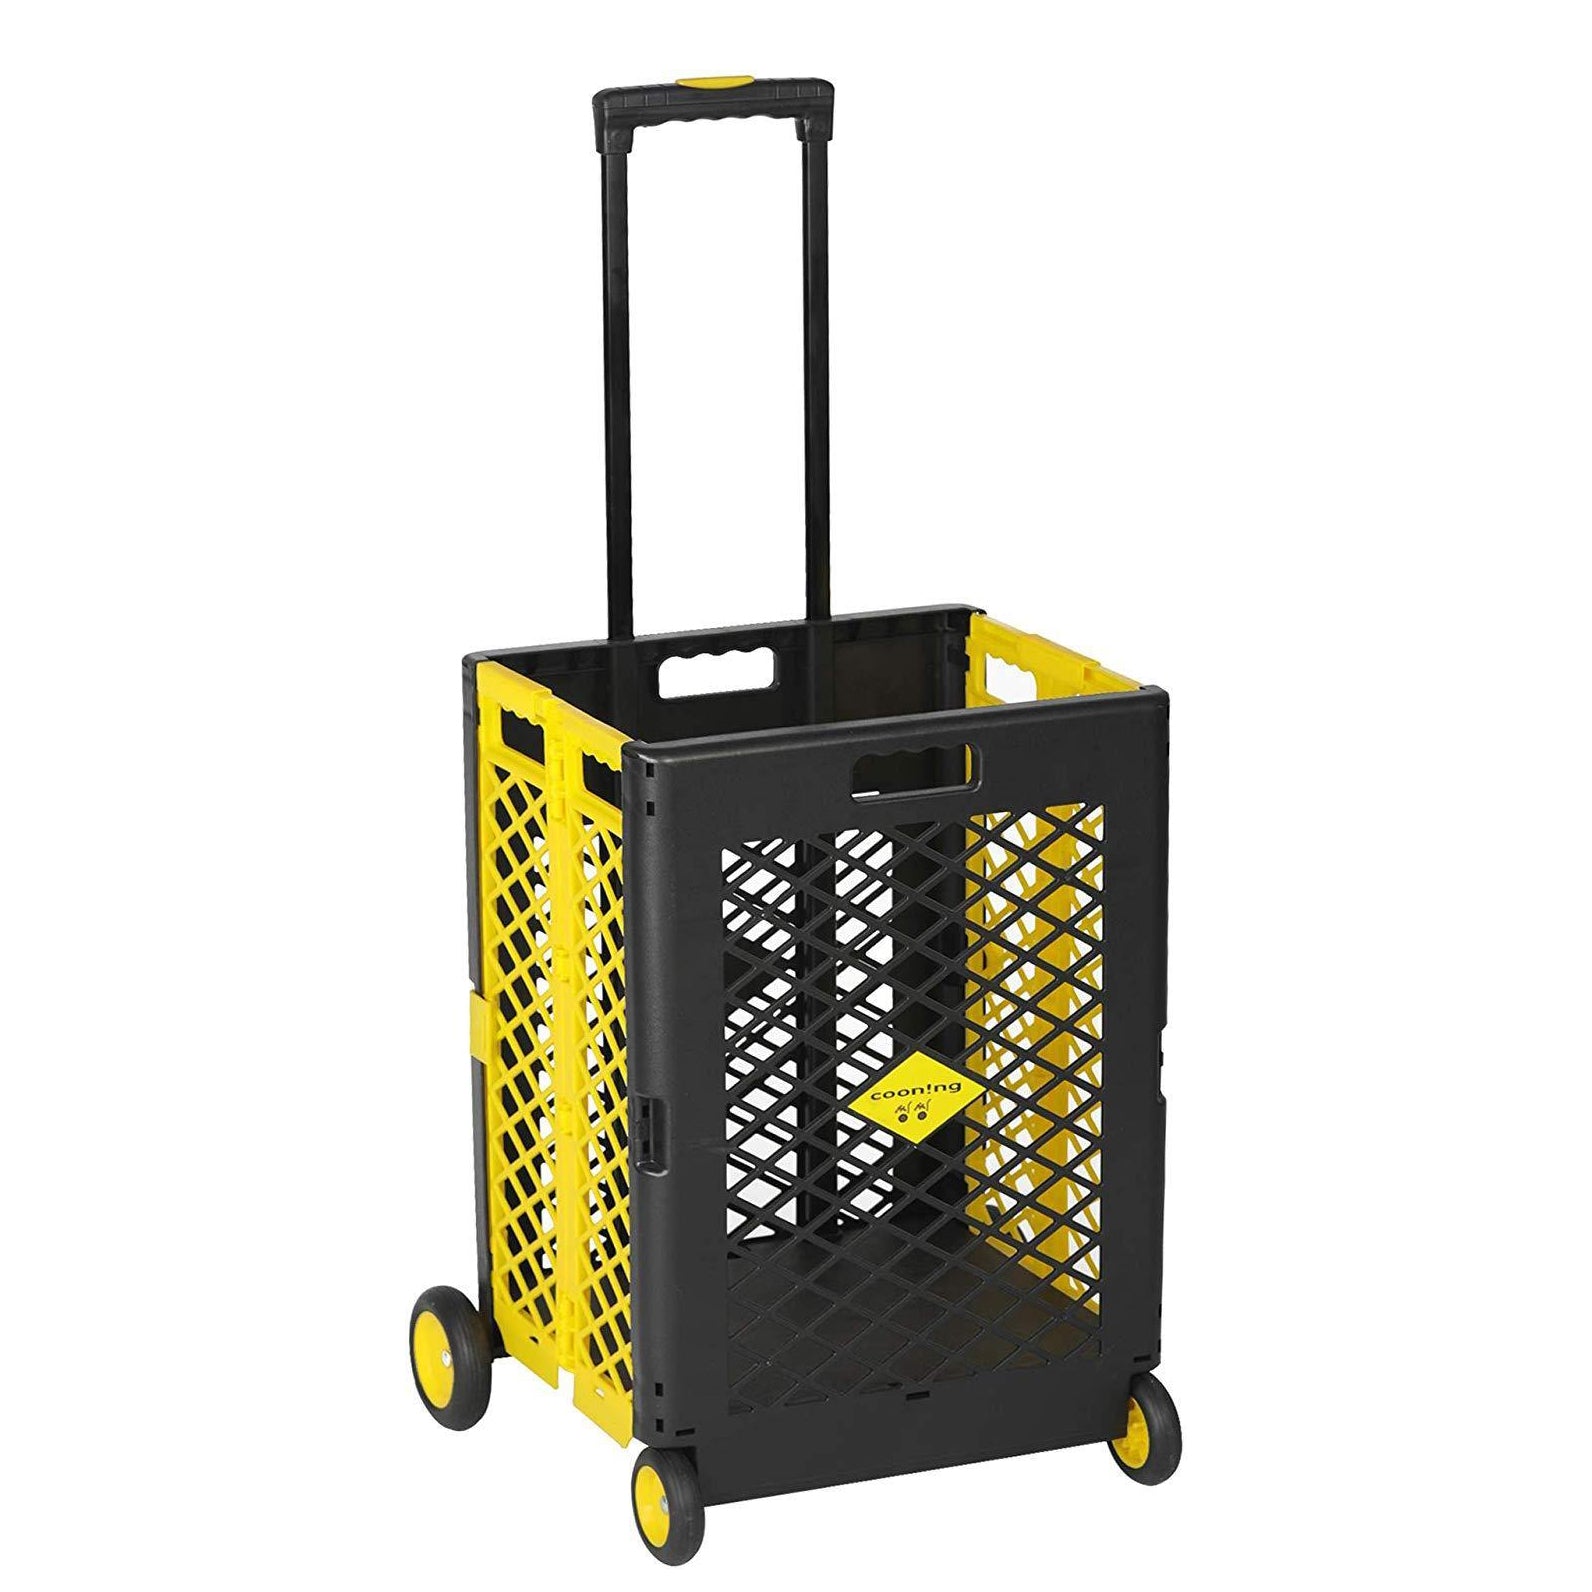 55L Foldable Rolling Cart with Wheels, Portable Updated Utility Tools Rolling Crate w/ Telescopic Handle, Yellow